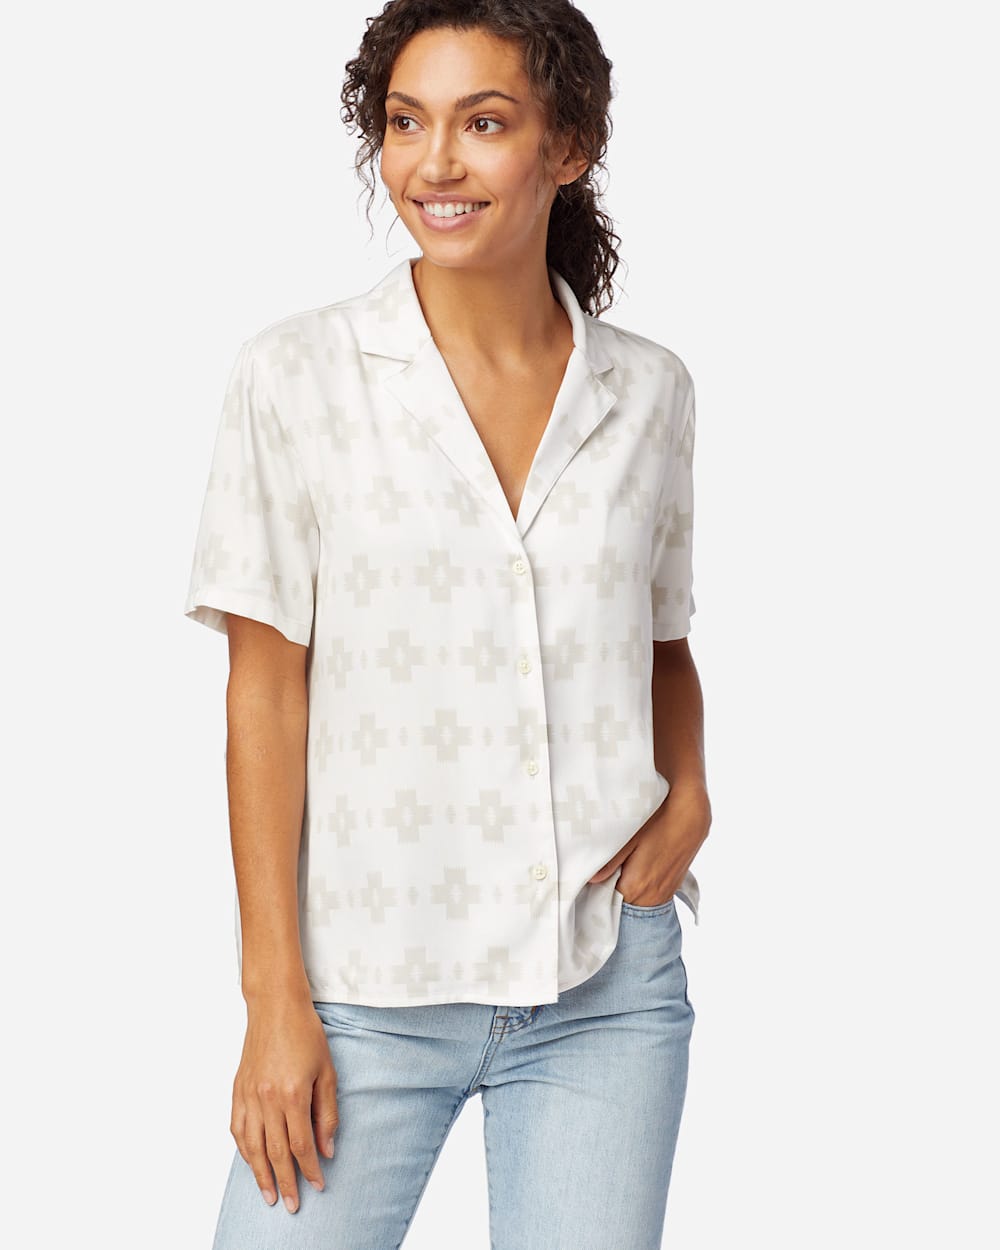 WOMEN'S SHORT-SLEEVE PATTERNED SHIRT IN WHITE image number 1